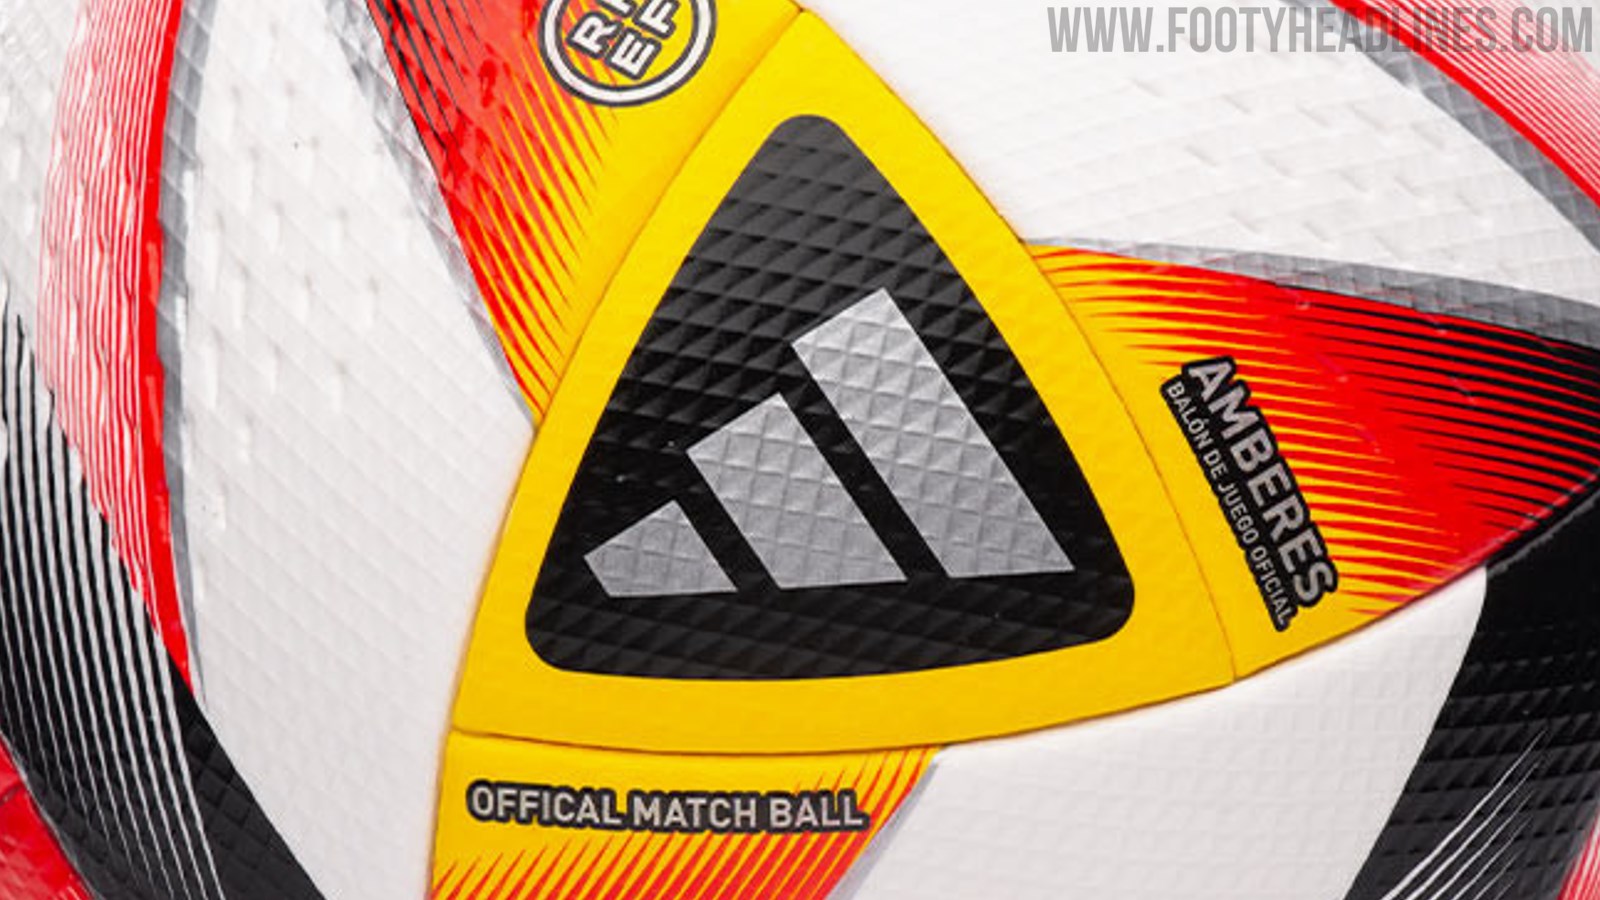 Adidas 23-24 Copa del & Spanish Cup Ball Released - Footy Headlines